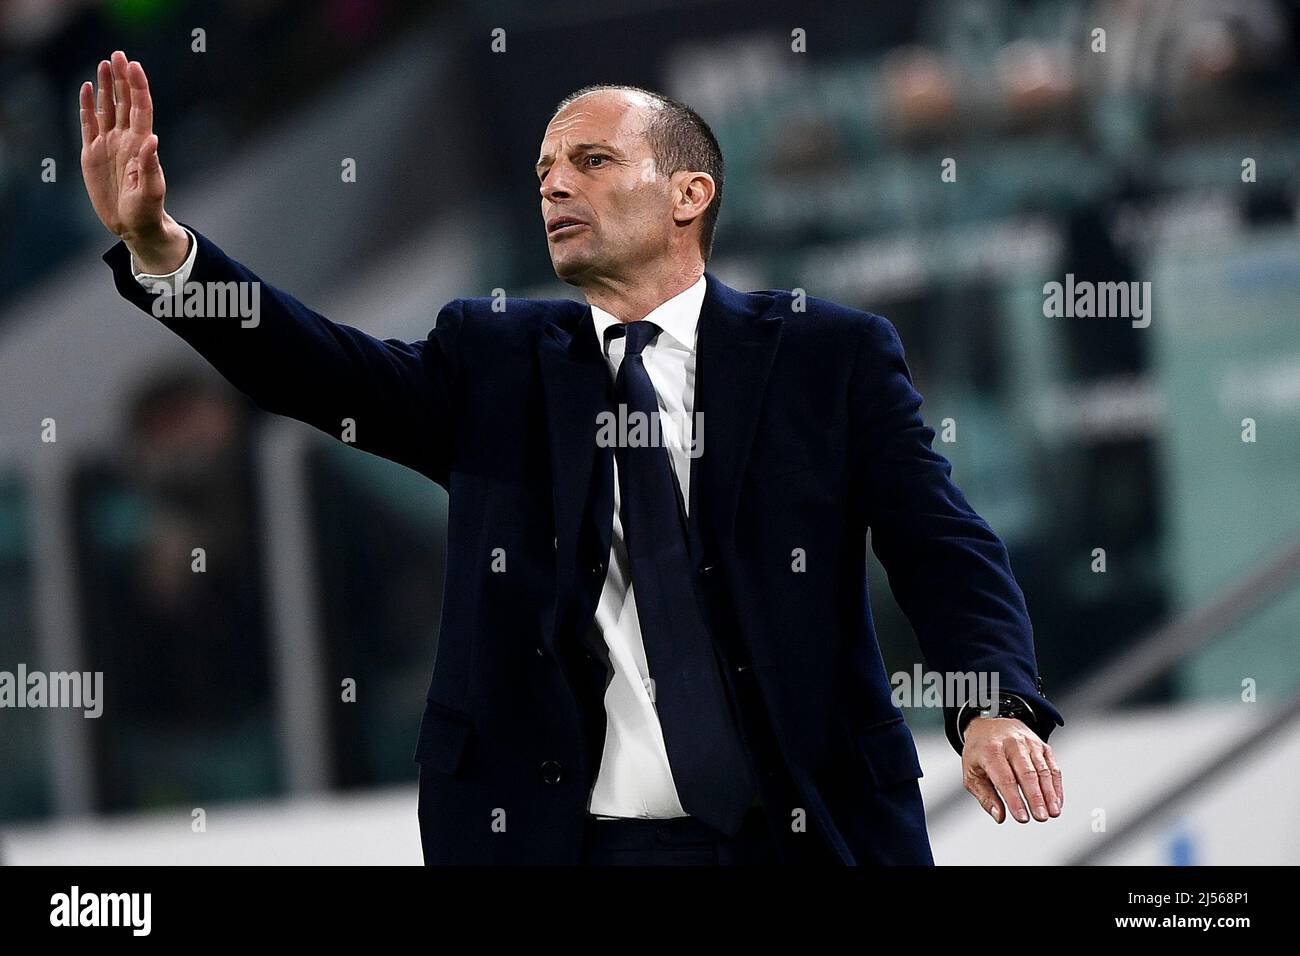 Turin, Italy. 20 April 2022. Massimiliano Allegri, head coach of Juventus  FC, reacts during the Coppa Italia semi-final second leg football match  between Juventus FC and ACF Fiorentina. Credit: Nicolò Campo/Alamy Live